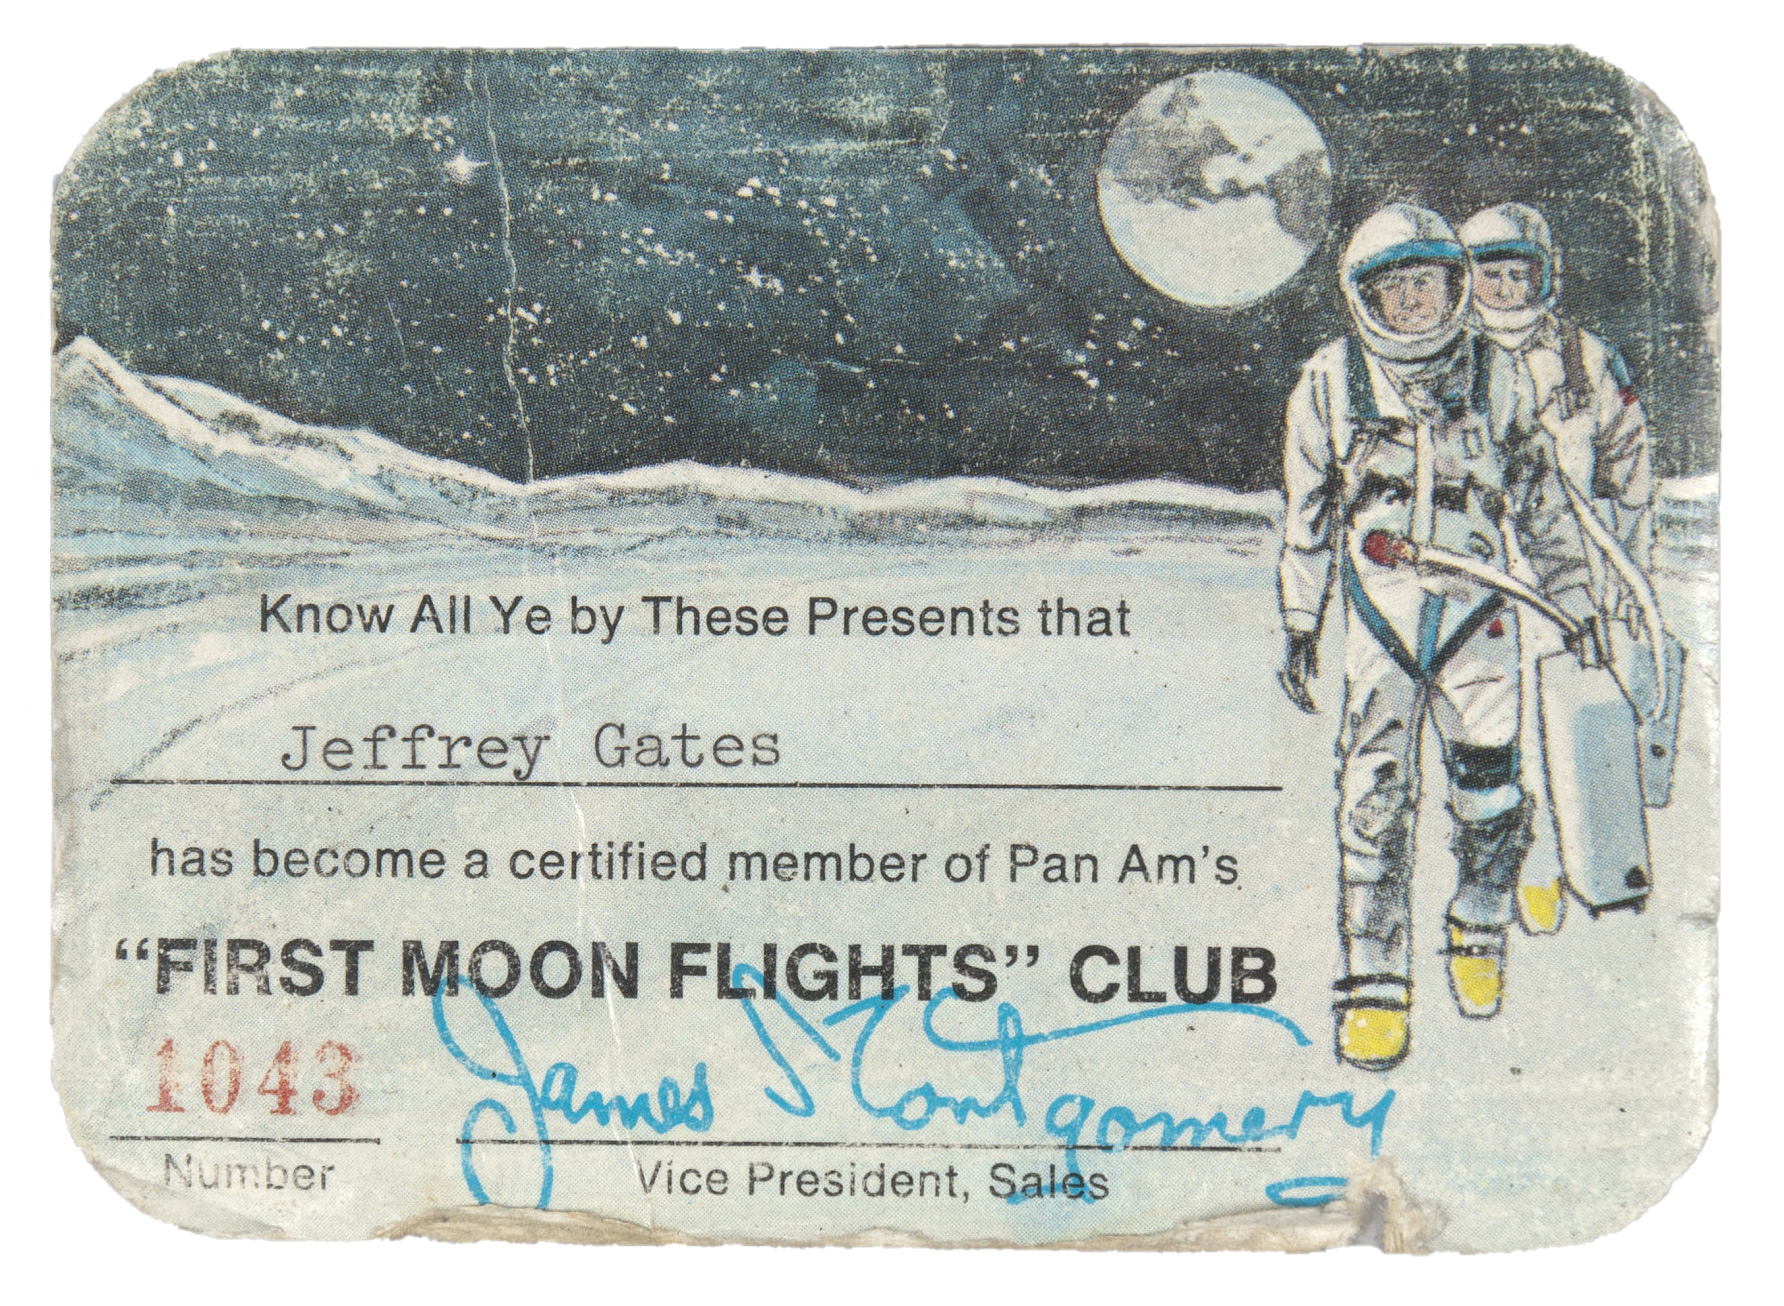 This Pan Am "First Moon Flights" Club card, number 1043, was issued by the airline to Jeffrey Gates in the late 1960s. Gates acquired the card (as well as reservations for himself and his wife-of-the-future) when he was 20 years old. (Courtesy Smithsonian's National Air and Space Museum)